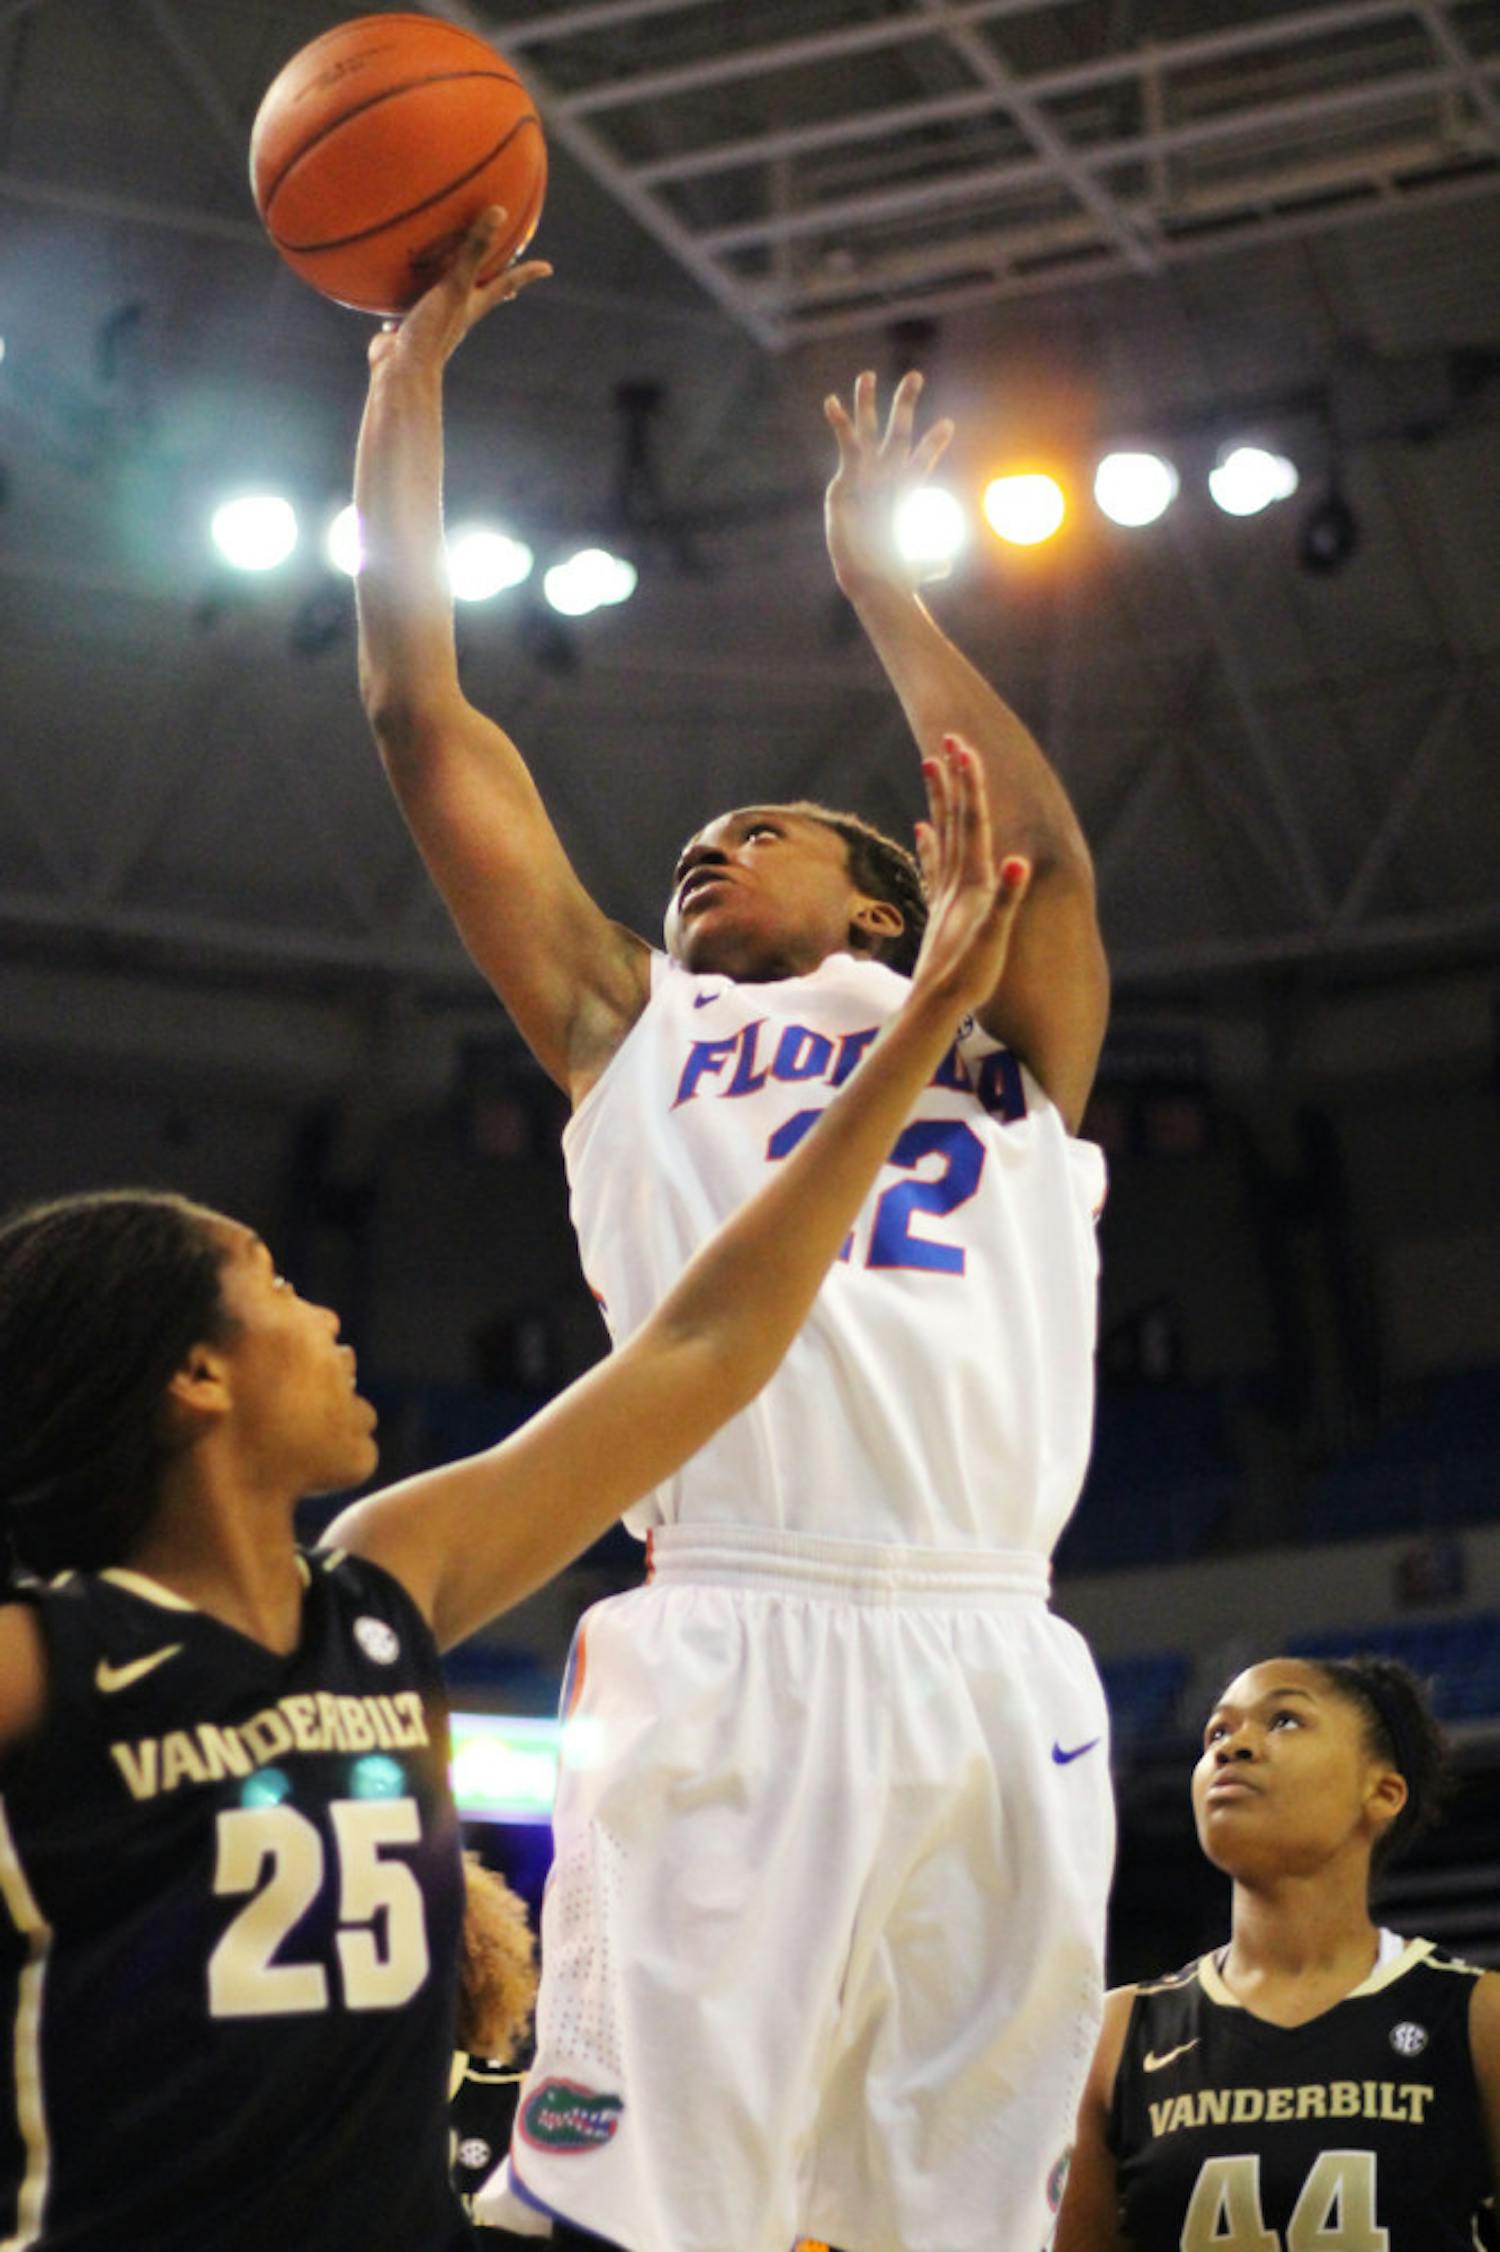 Sophomore Kayla Lewis shoots during Florida’s 68-57 loss to Vanderbilt on Feb. 21 in the O’Connell Center.